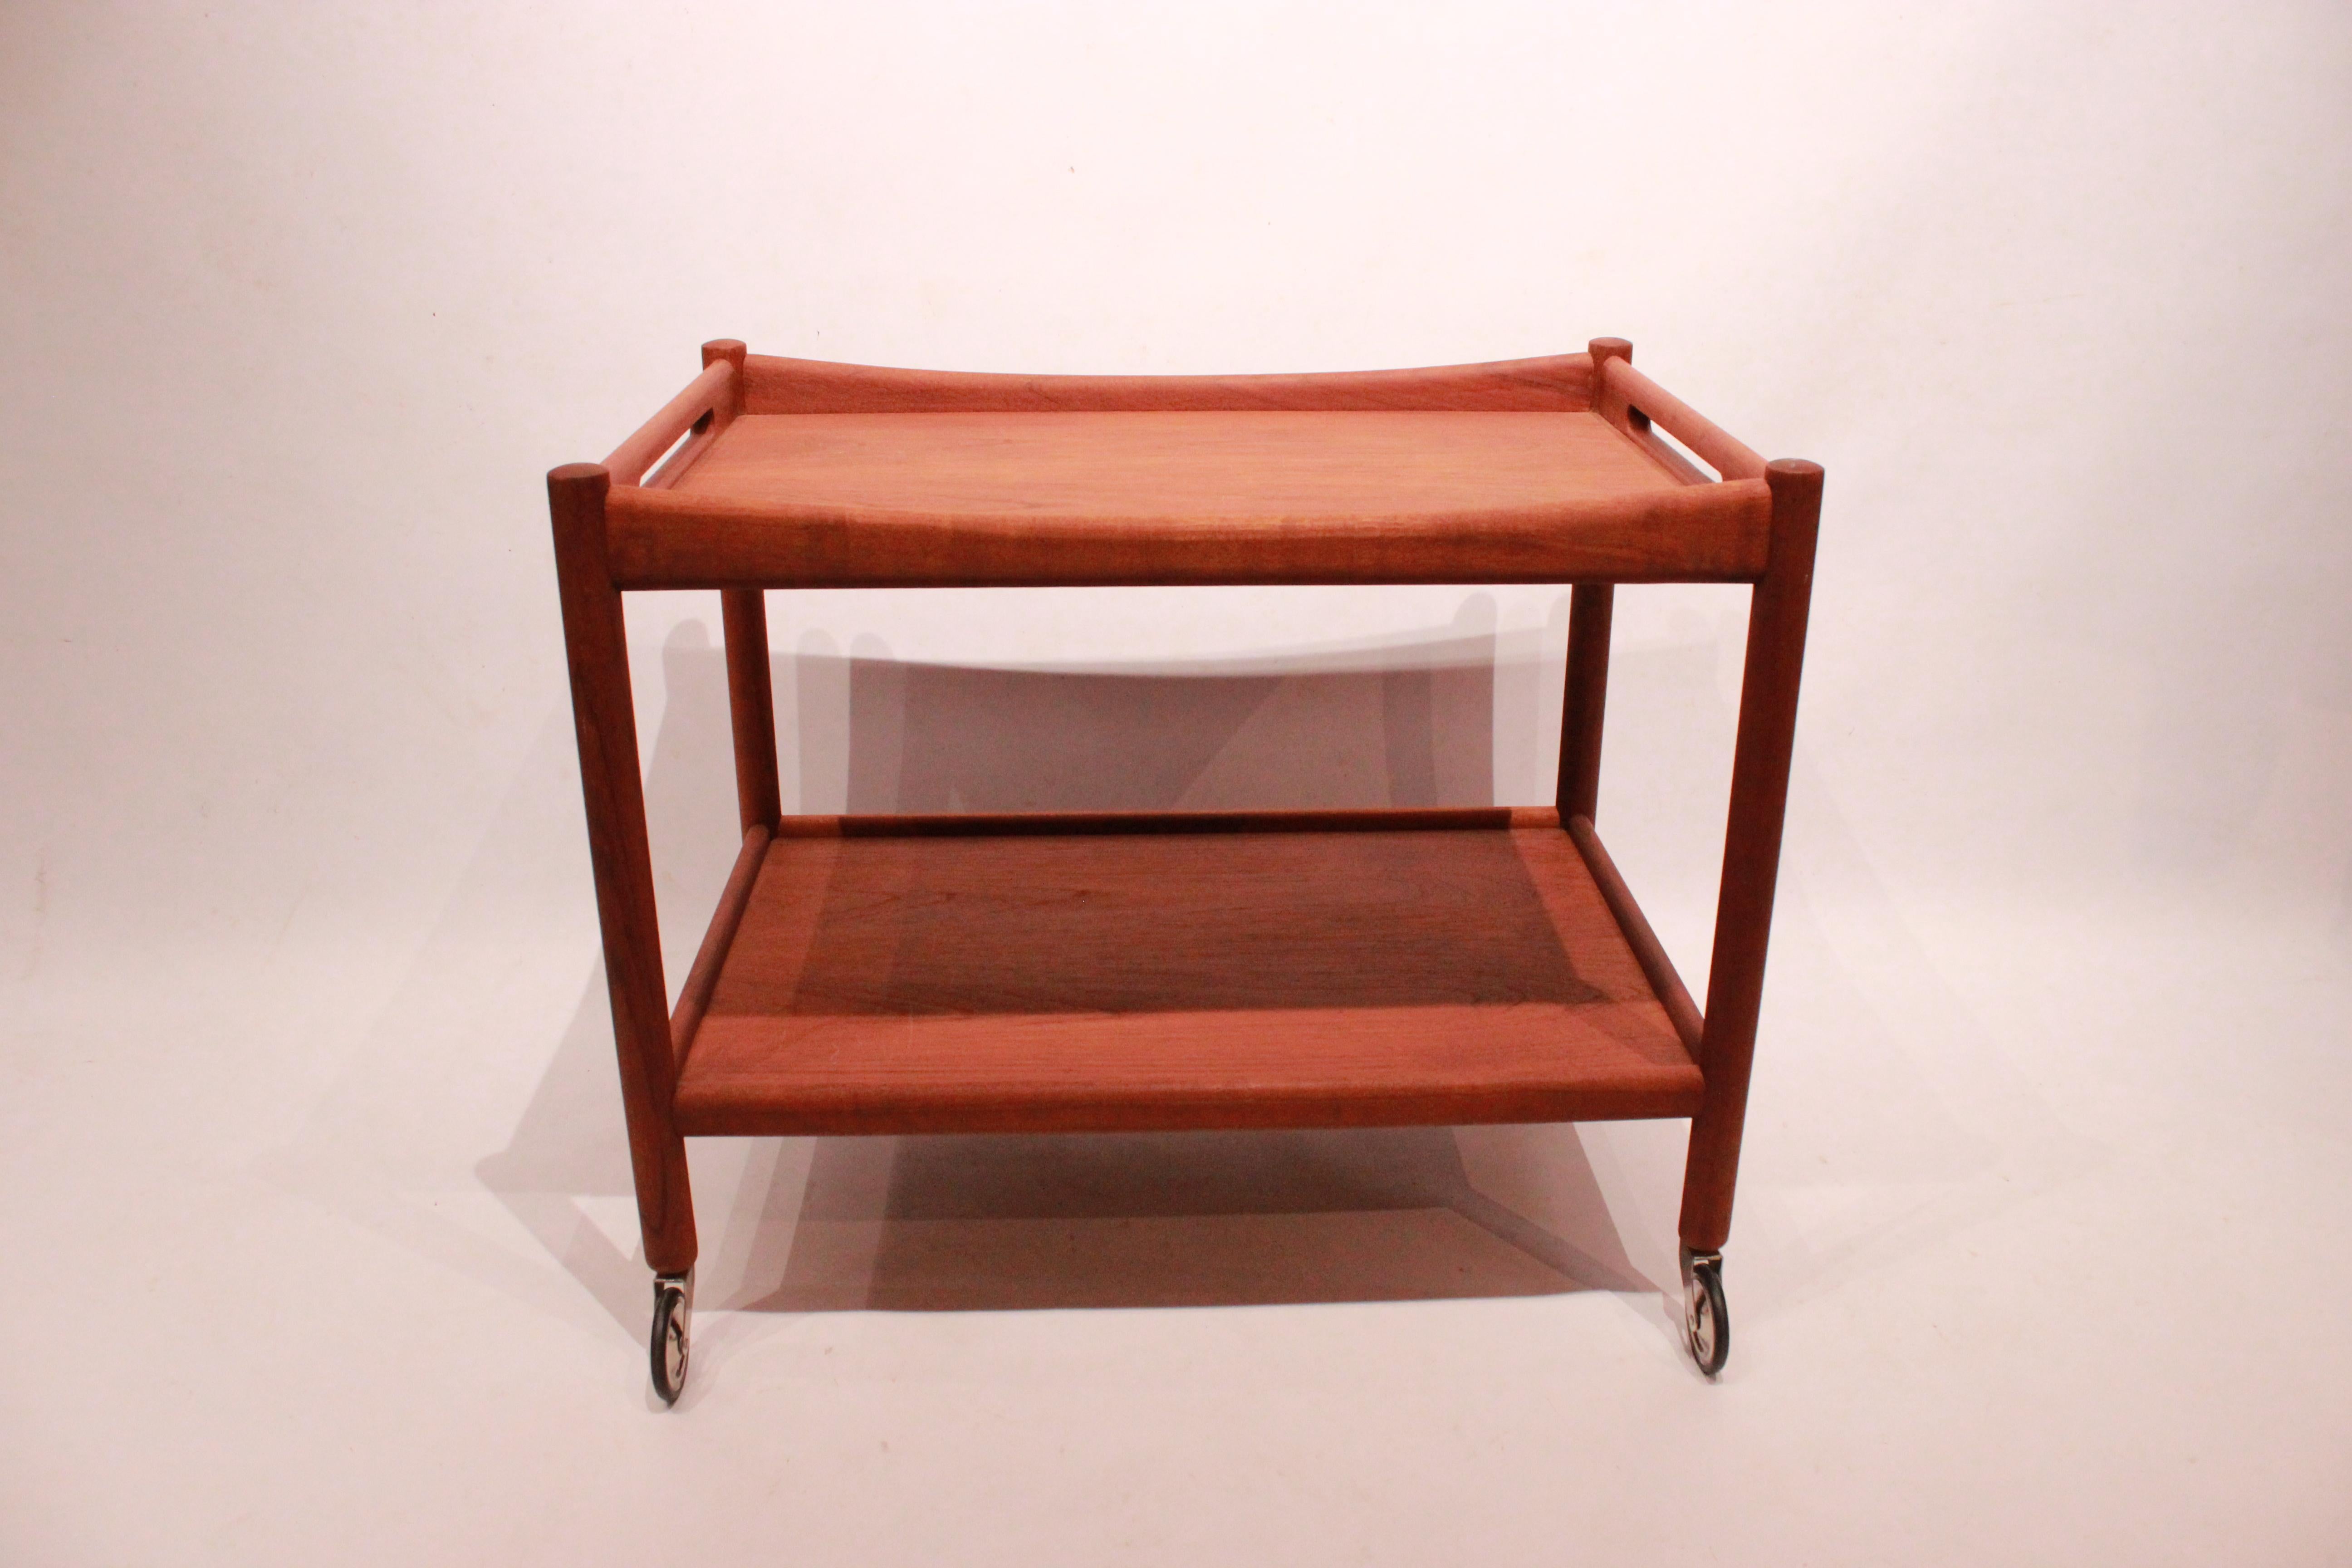 Tray table in teak designed by Hans J. Wegner from the 1960s. The table is in great vintage condition.